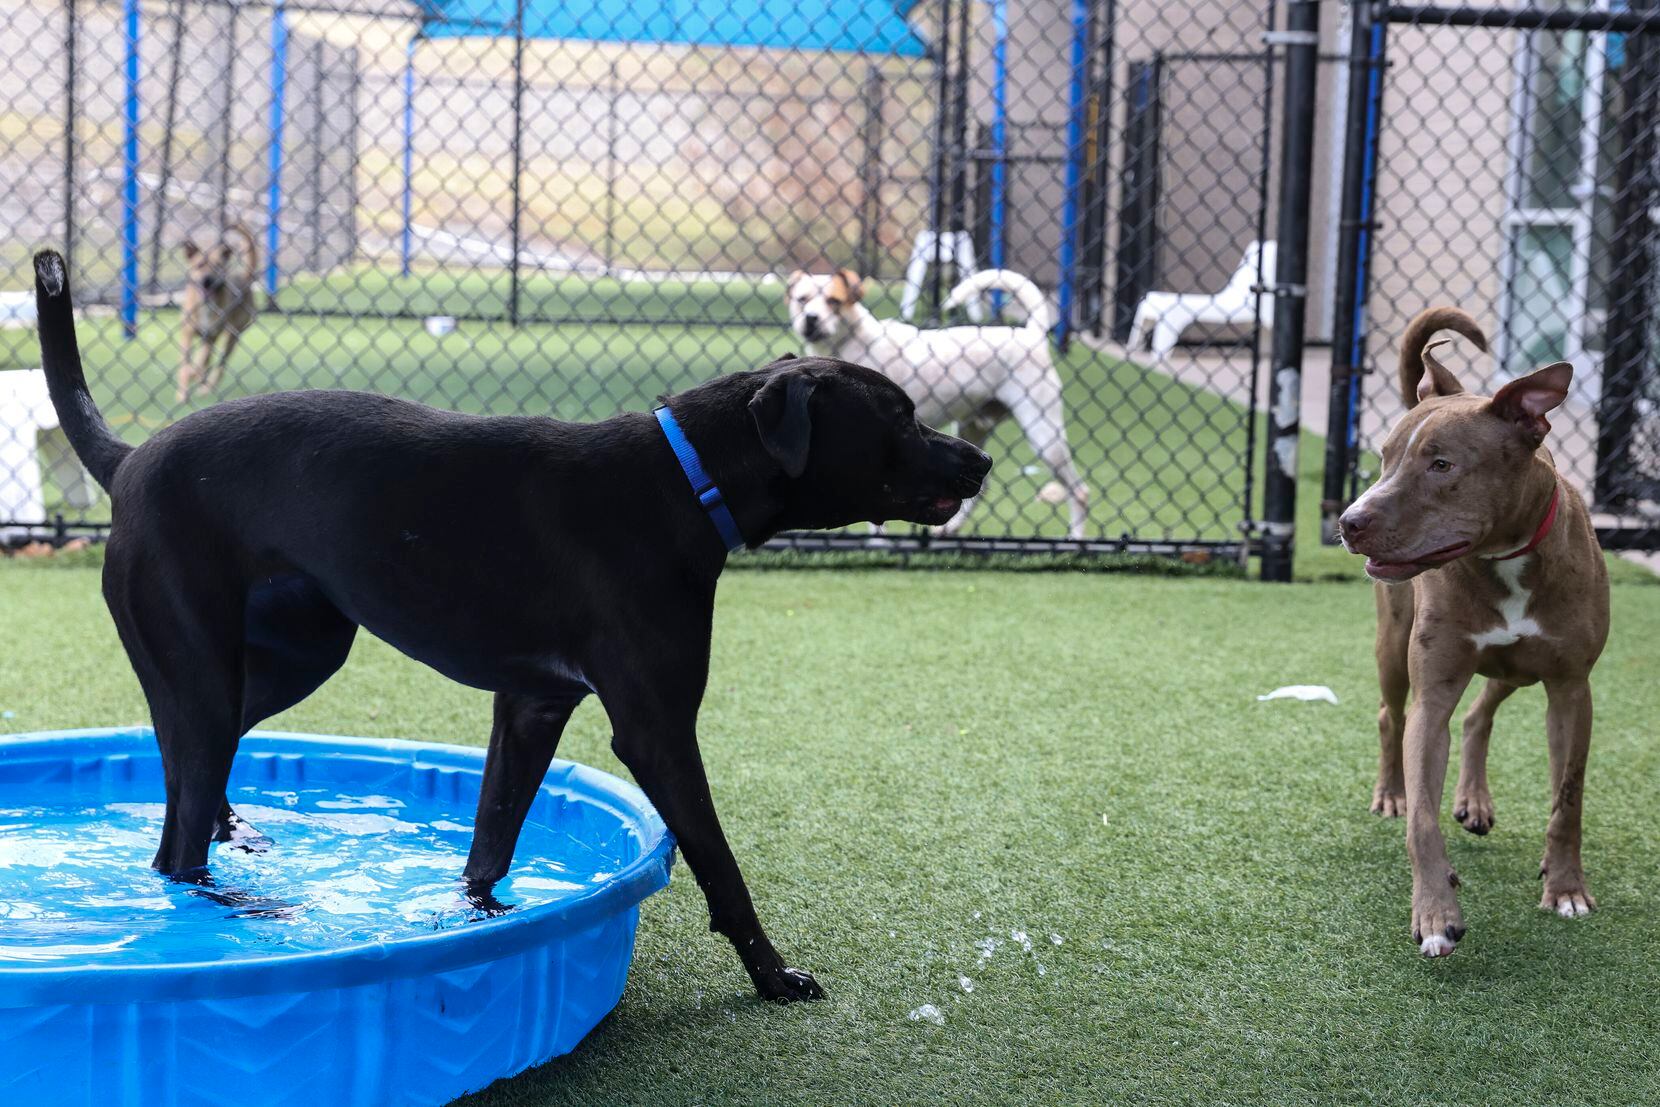 Dogs play outdoors during a behavior assessment session at Dallas Animal Services on Wednesday.